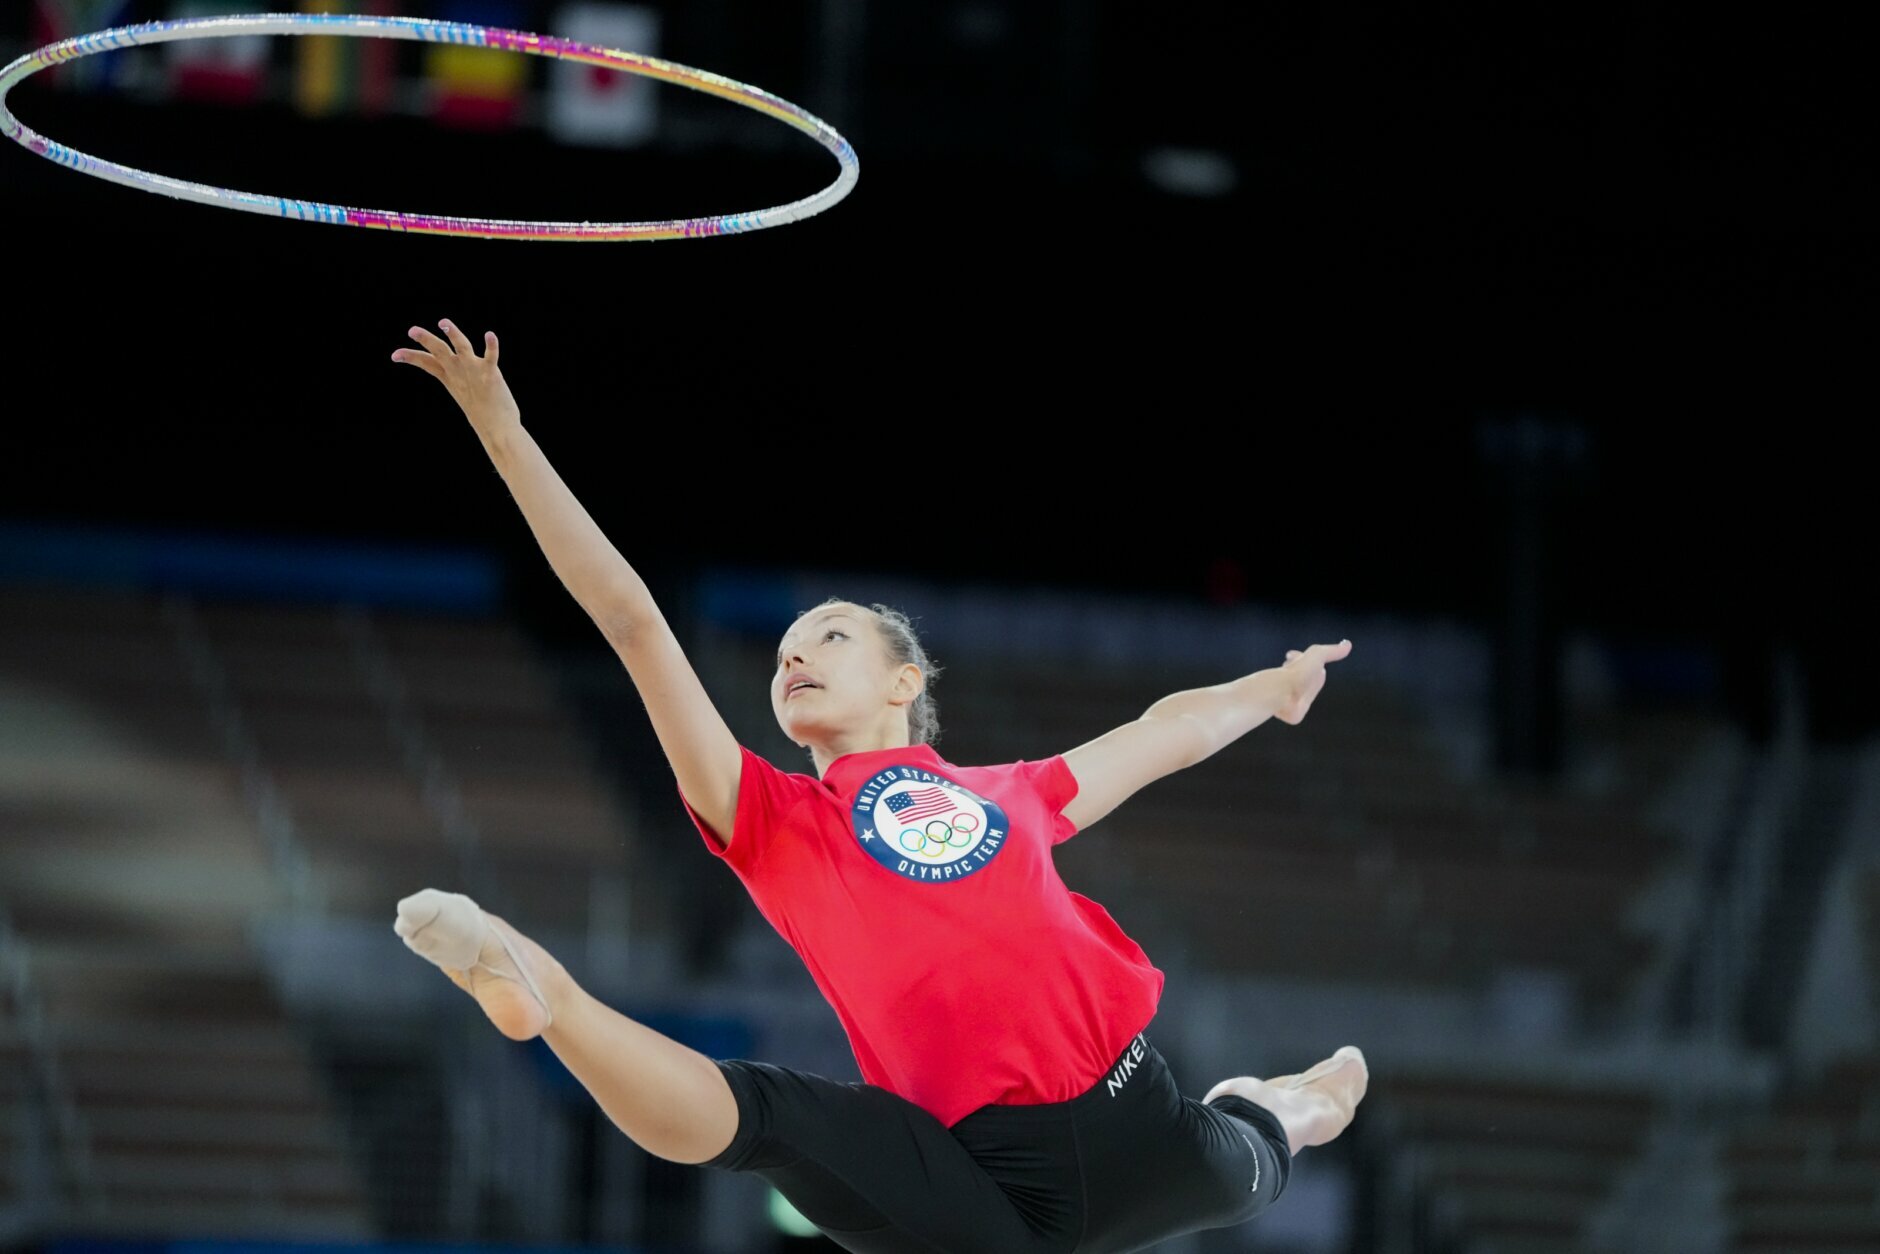 Evita Griskenas of the United States performs during a rhythmic gymnastics individual training session at the 2020 Summer Olympics, Thursday, Aug. 5, 2021, in Tokyo, Japan. (AP Photo/Markus Schreiber)